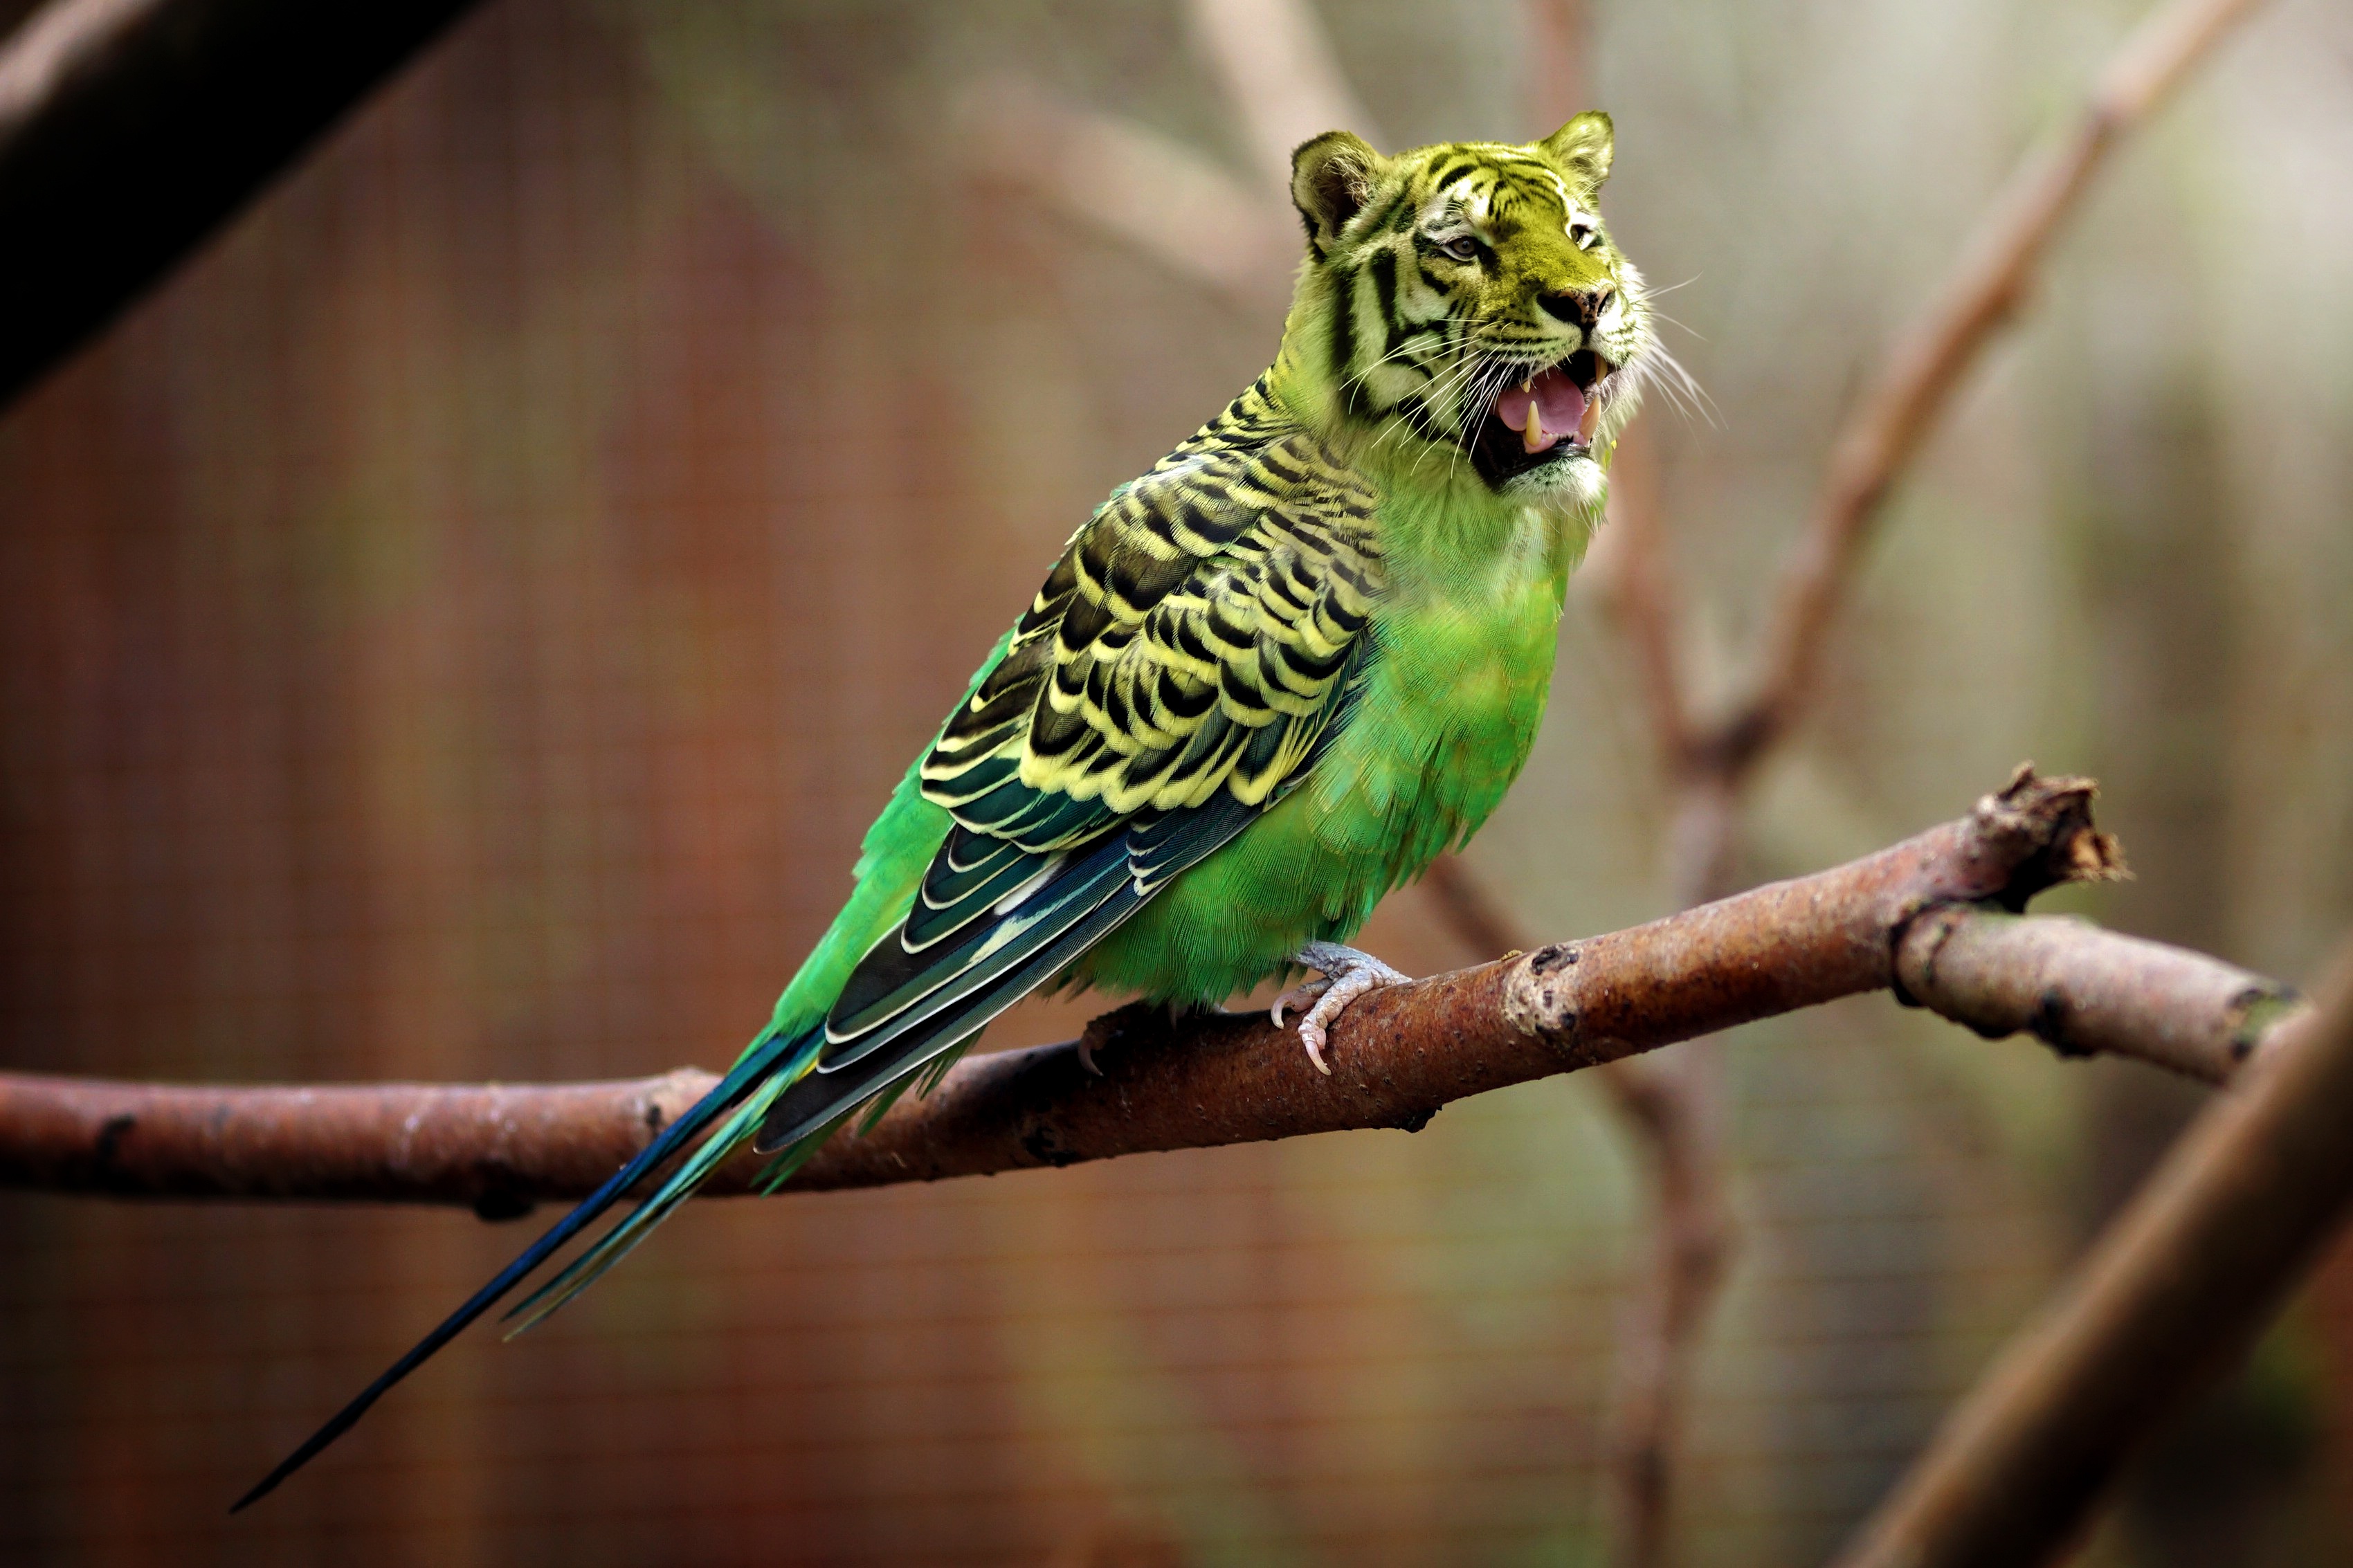 Wallpapers tiger wavy parrot photoshop on the desktop